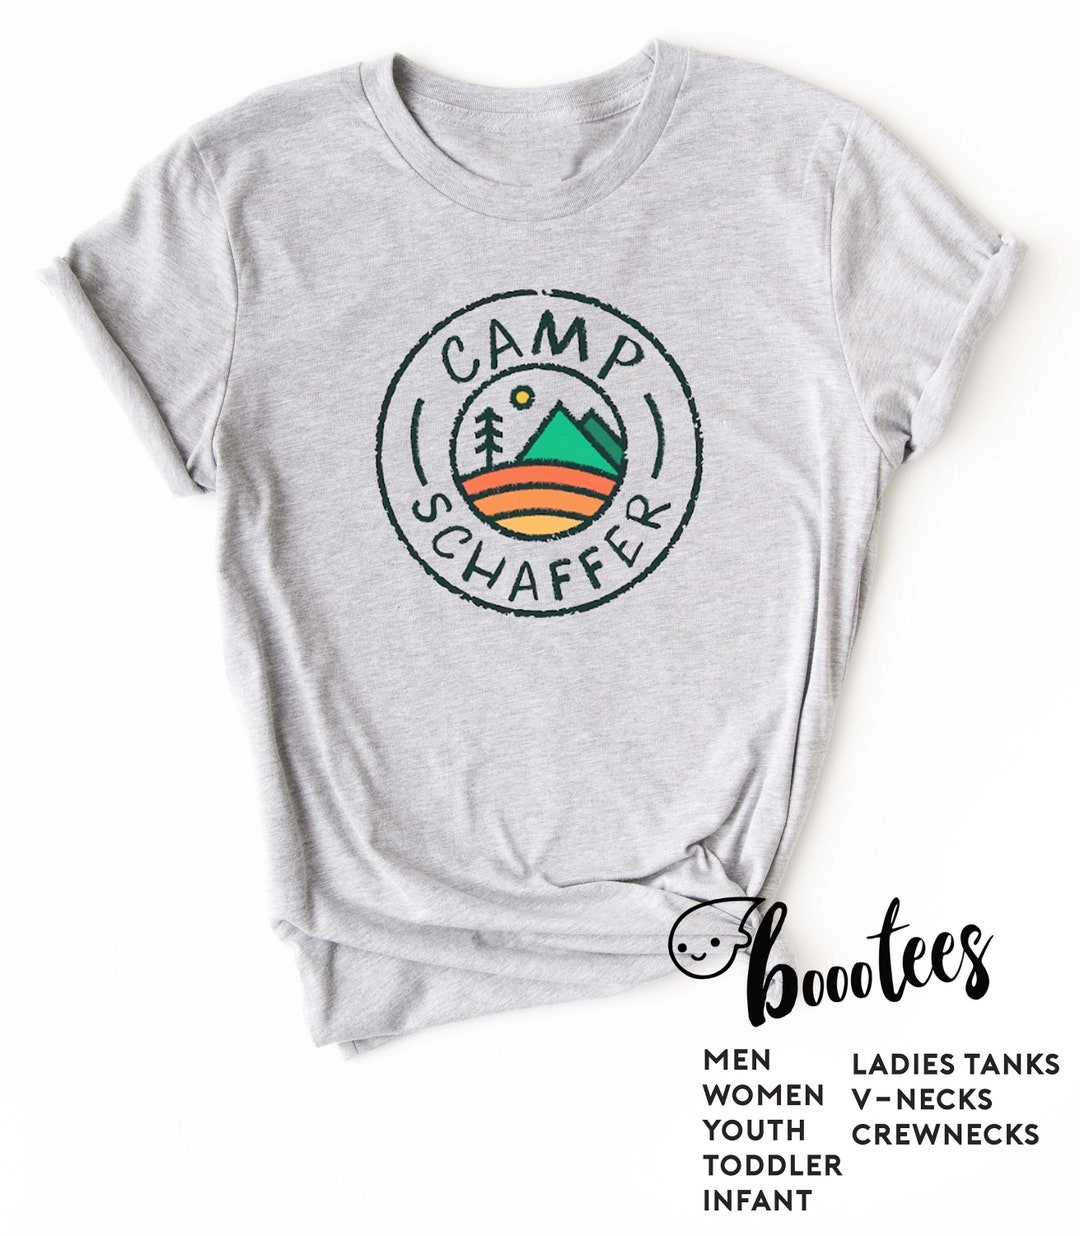 industrialisere Omkreds kapacitet Camping Shirts for Family Friends T-shirt Camp T Shirt Tee - Etsy